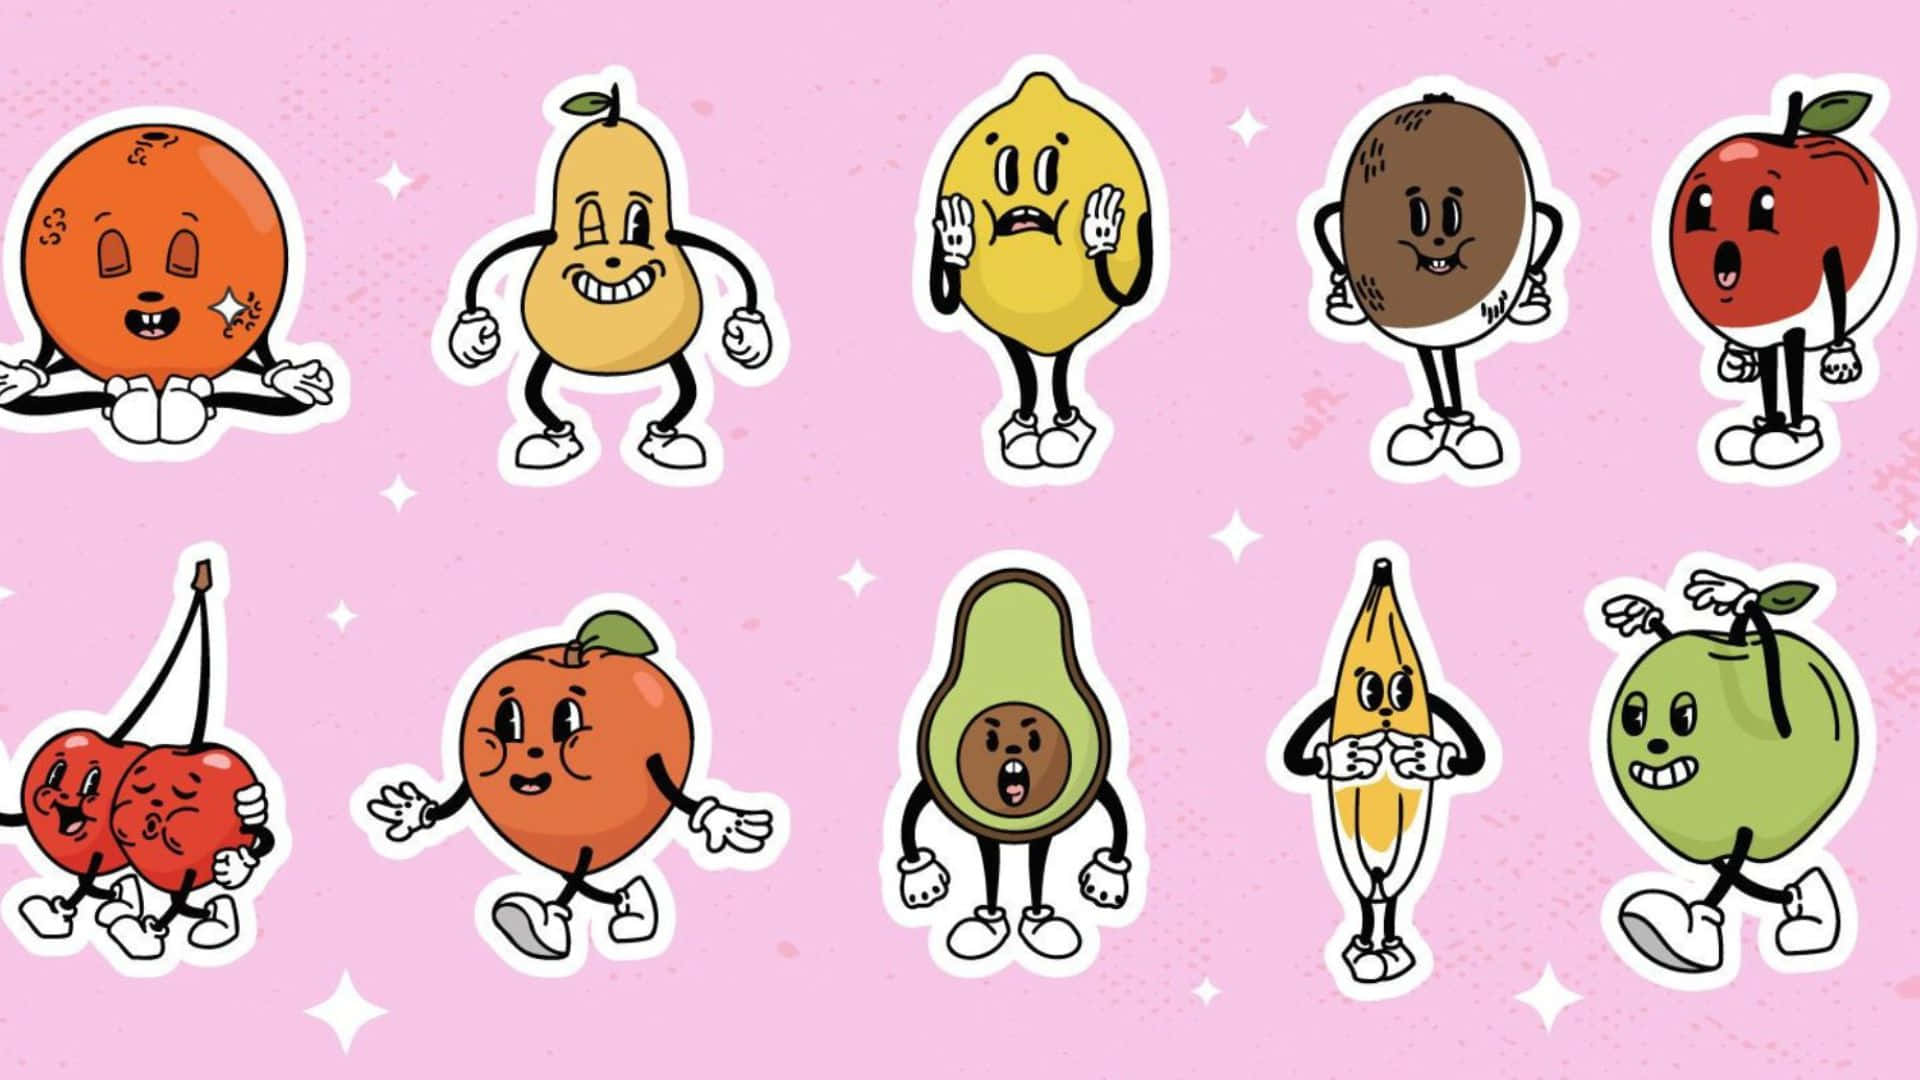 Retro_ Animated_ Fruit_ Characters Wallpaper